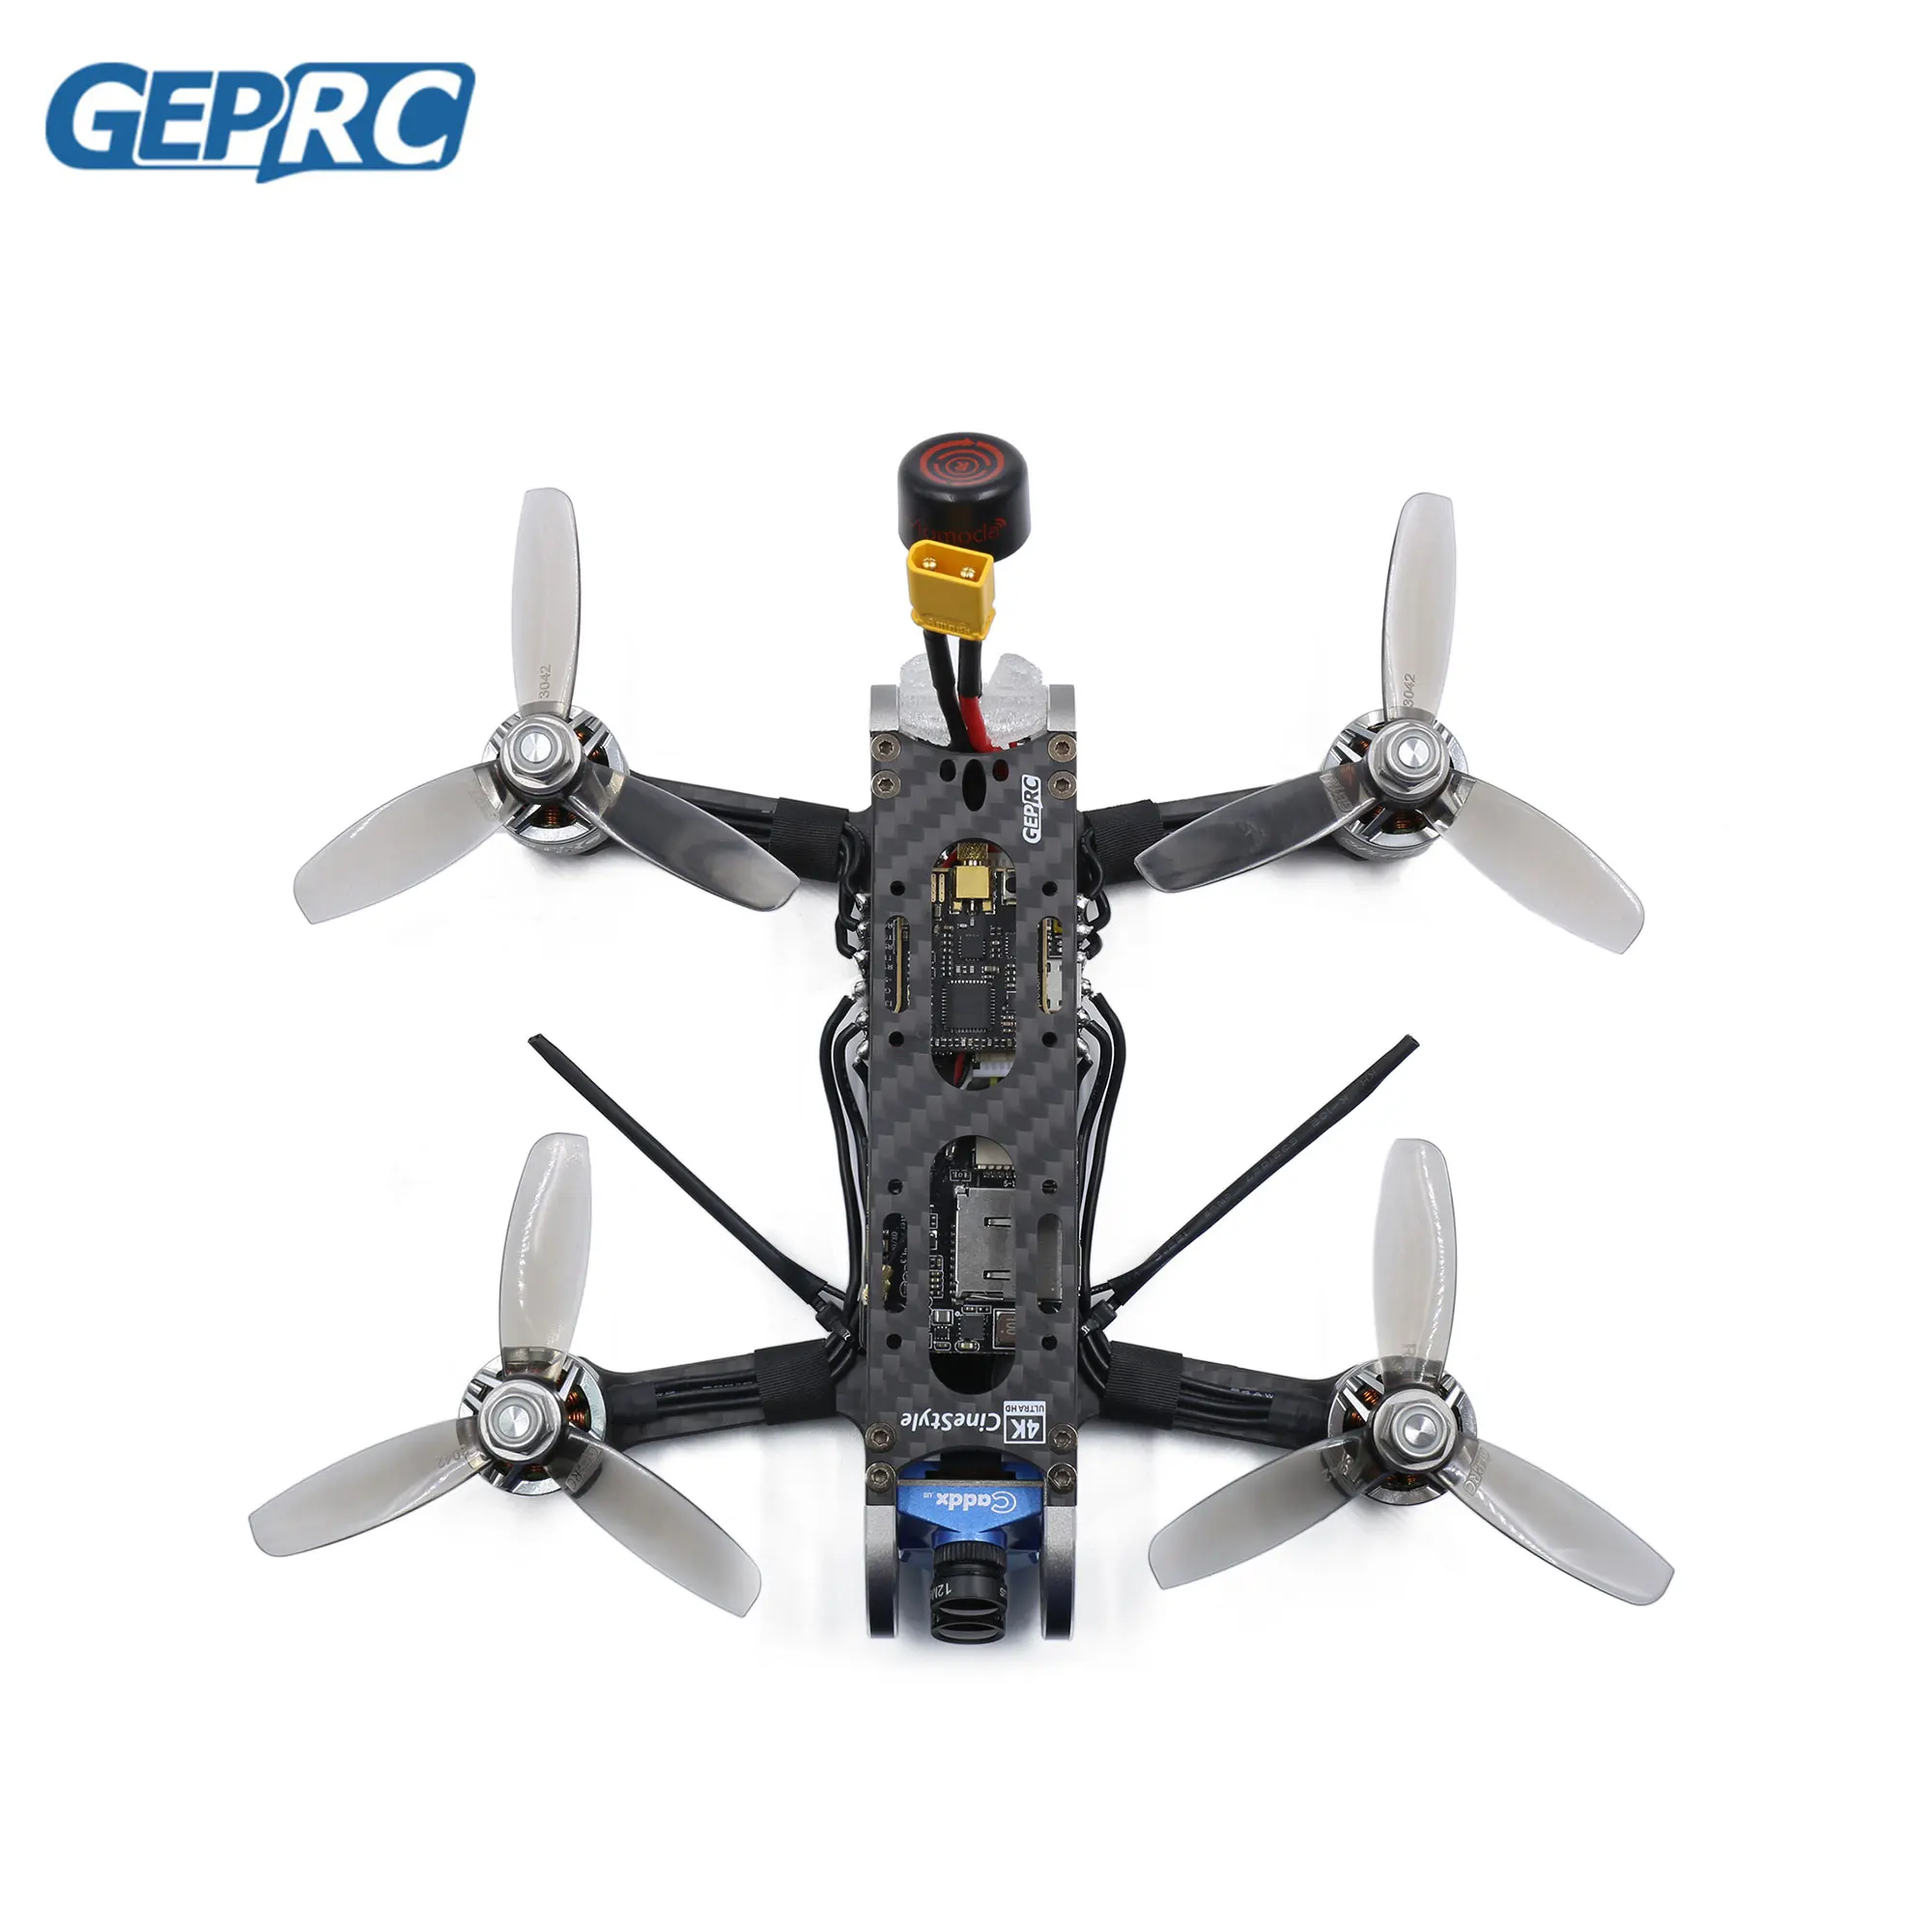 GEPRC CineStyle 4K STABLE PRO F722 BLHELI32 35A 500mW Caddx Tarsier 4K GR1507 3600KV 4S 144mm 3inch FPV Cinewhoop Ducted Drone 5